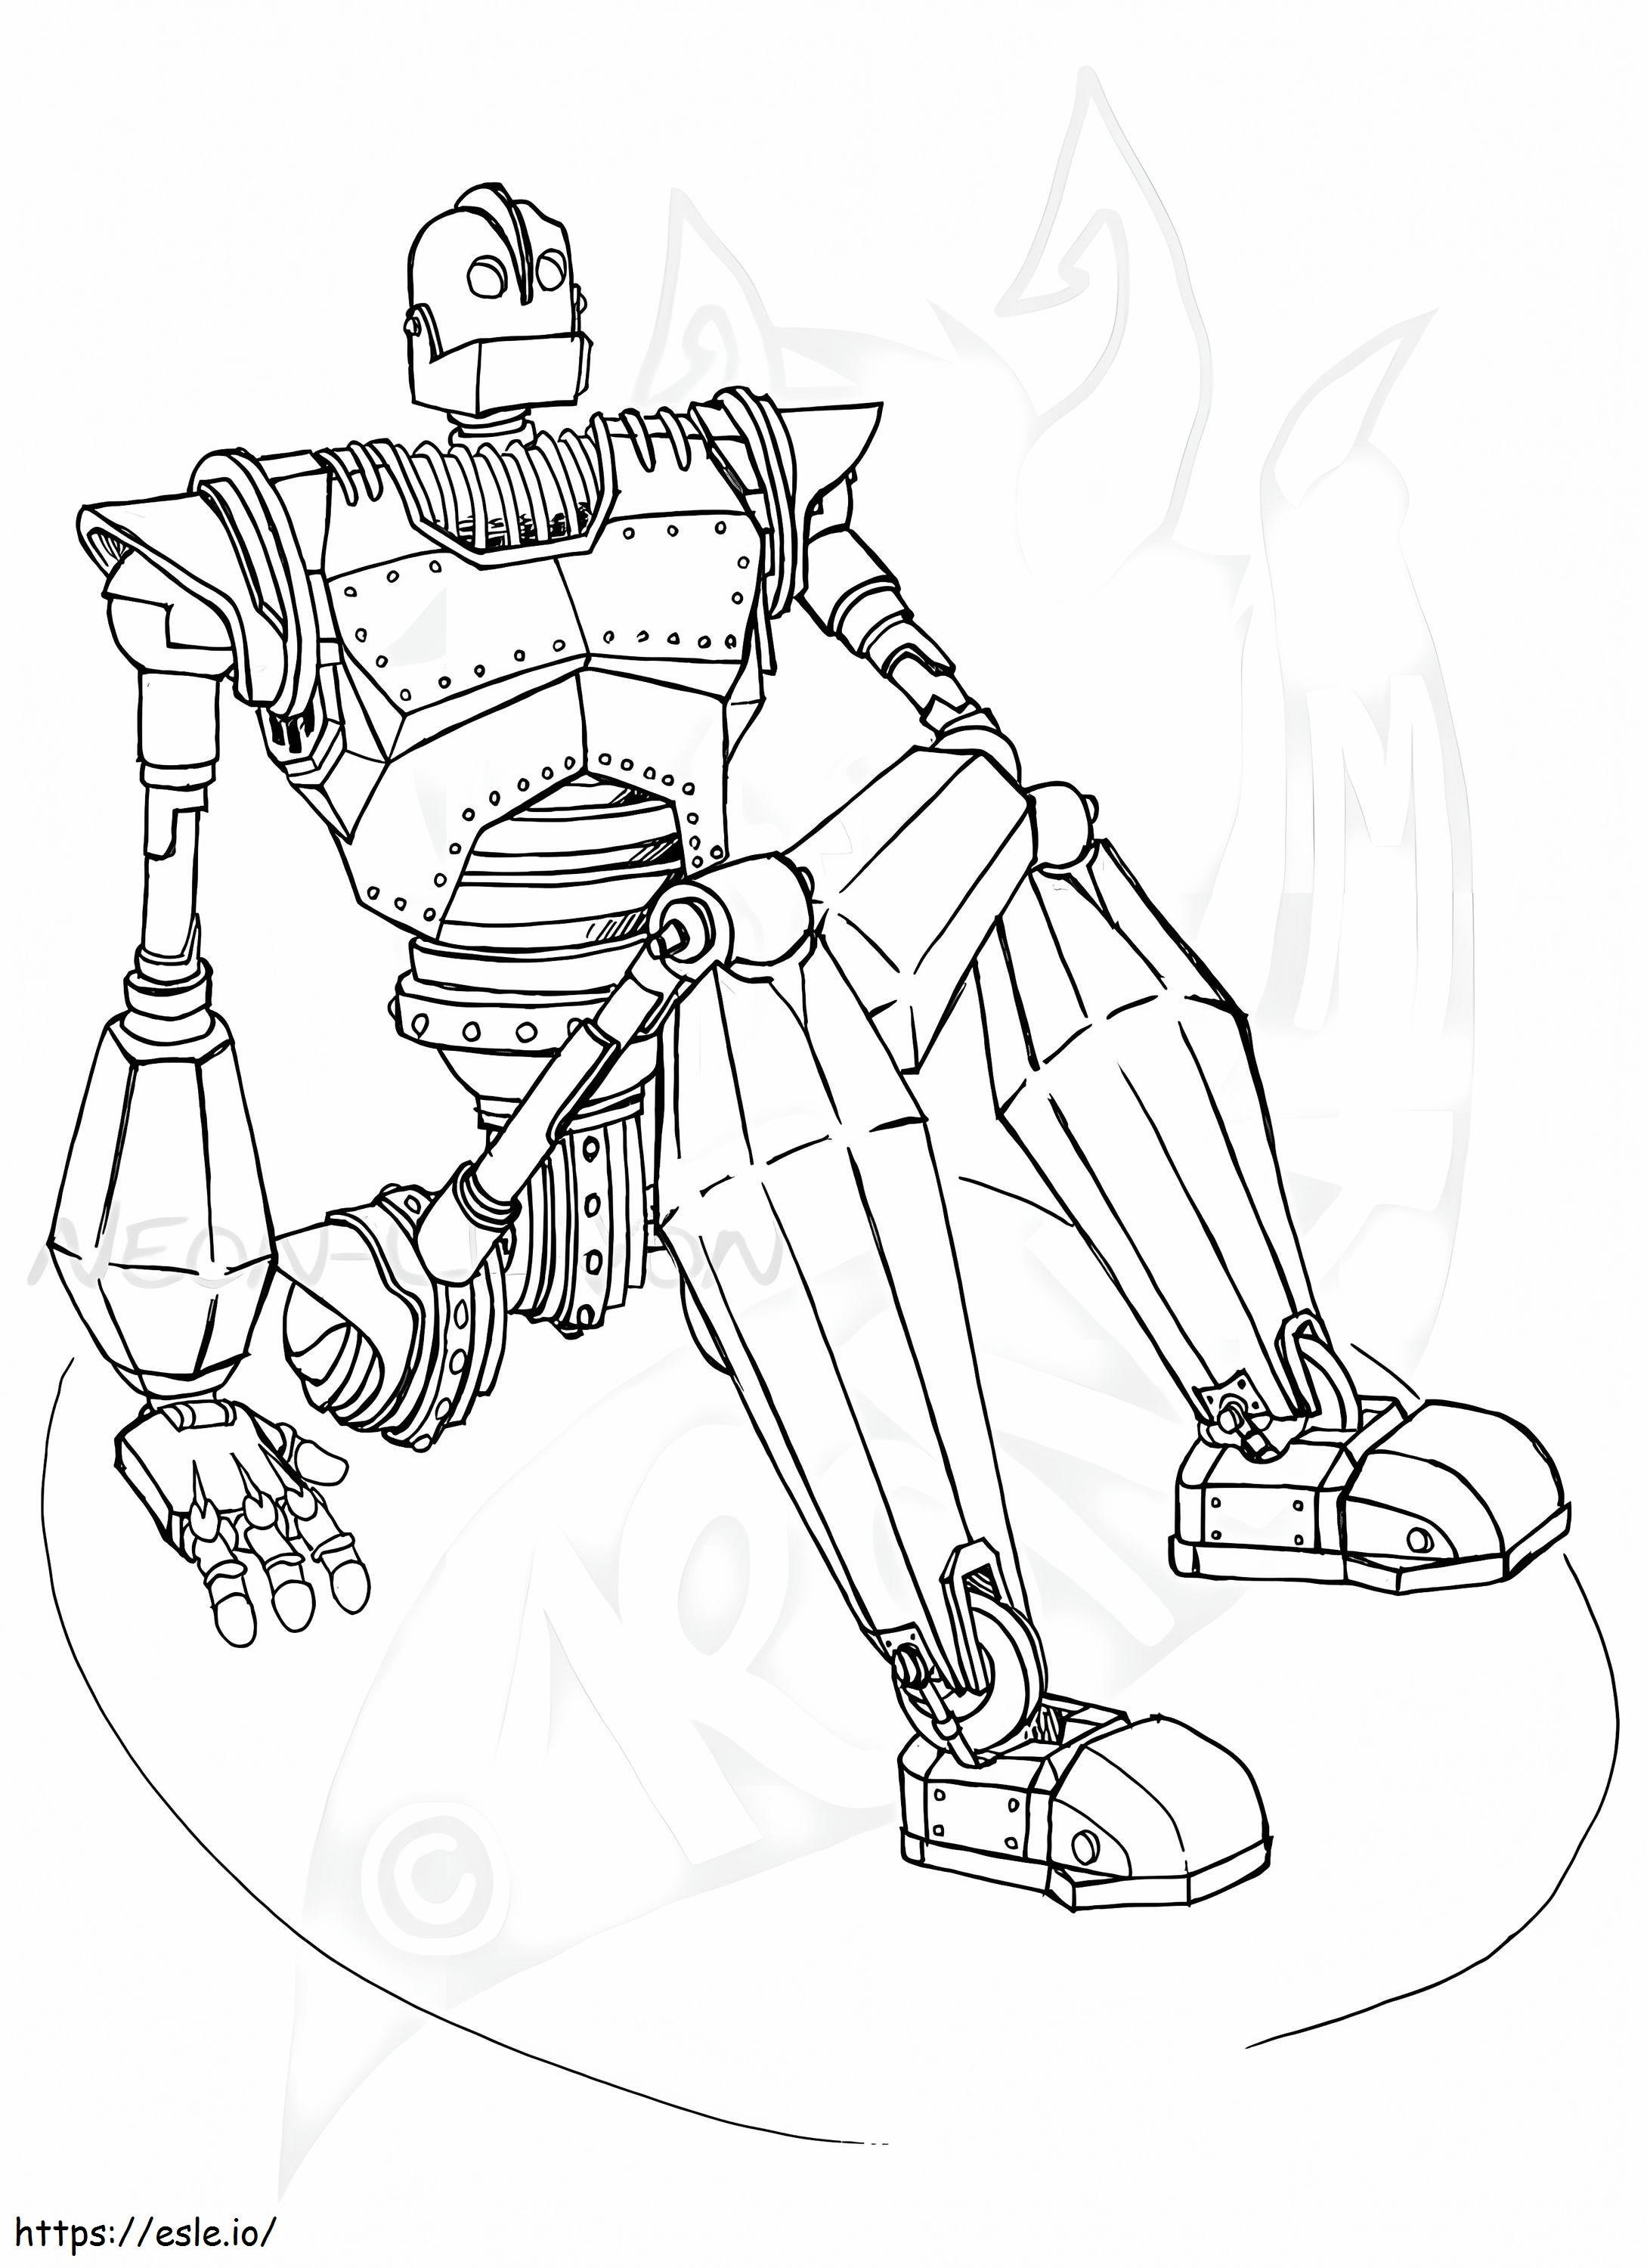 Iron Giant 6 coloring page